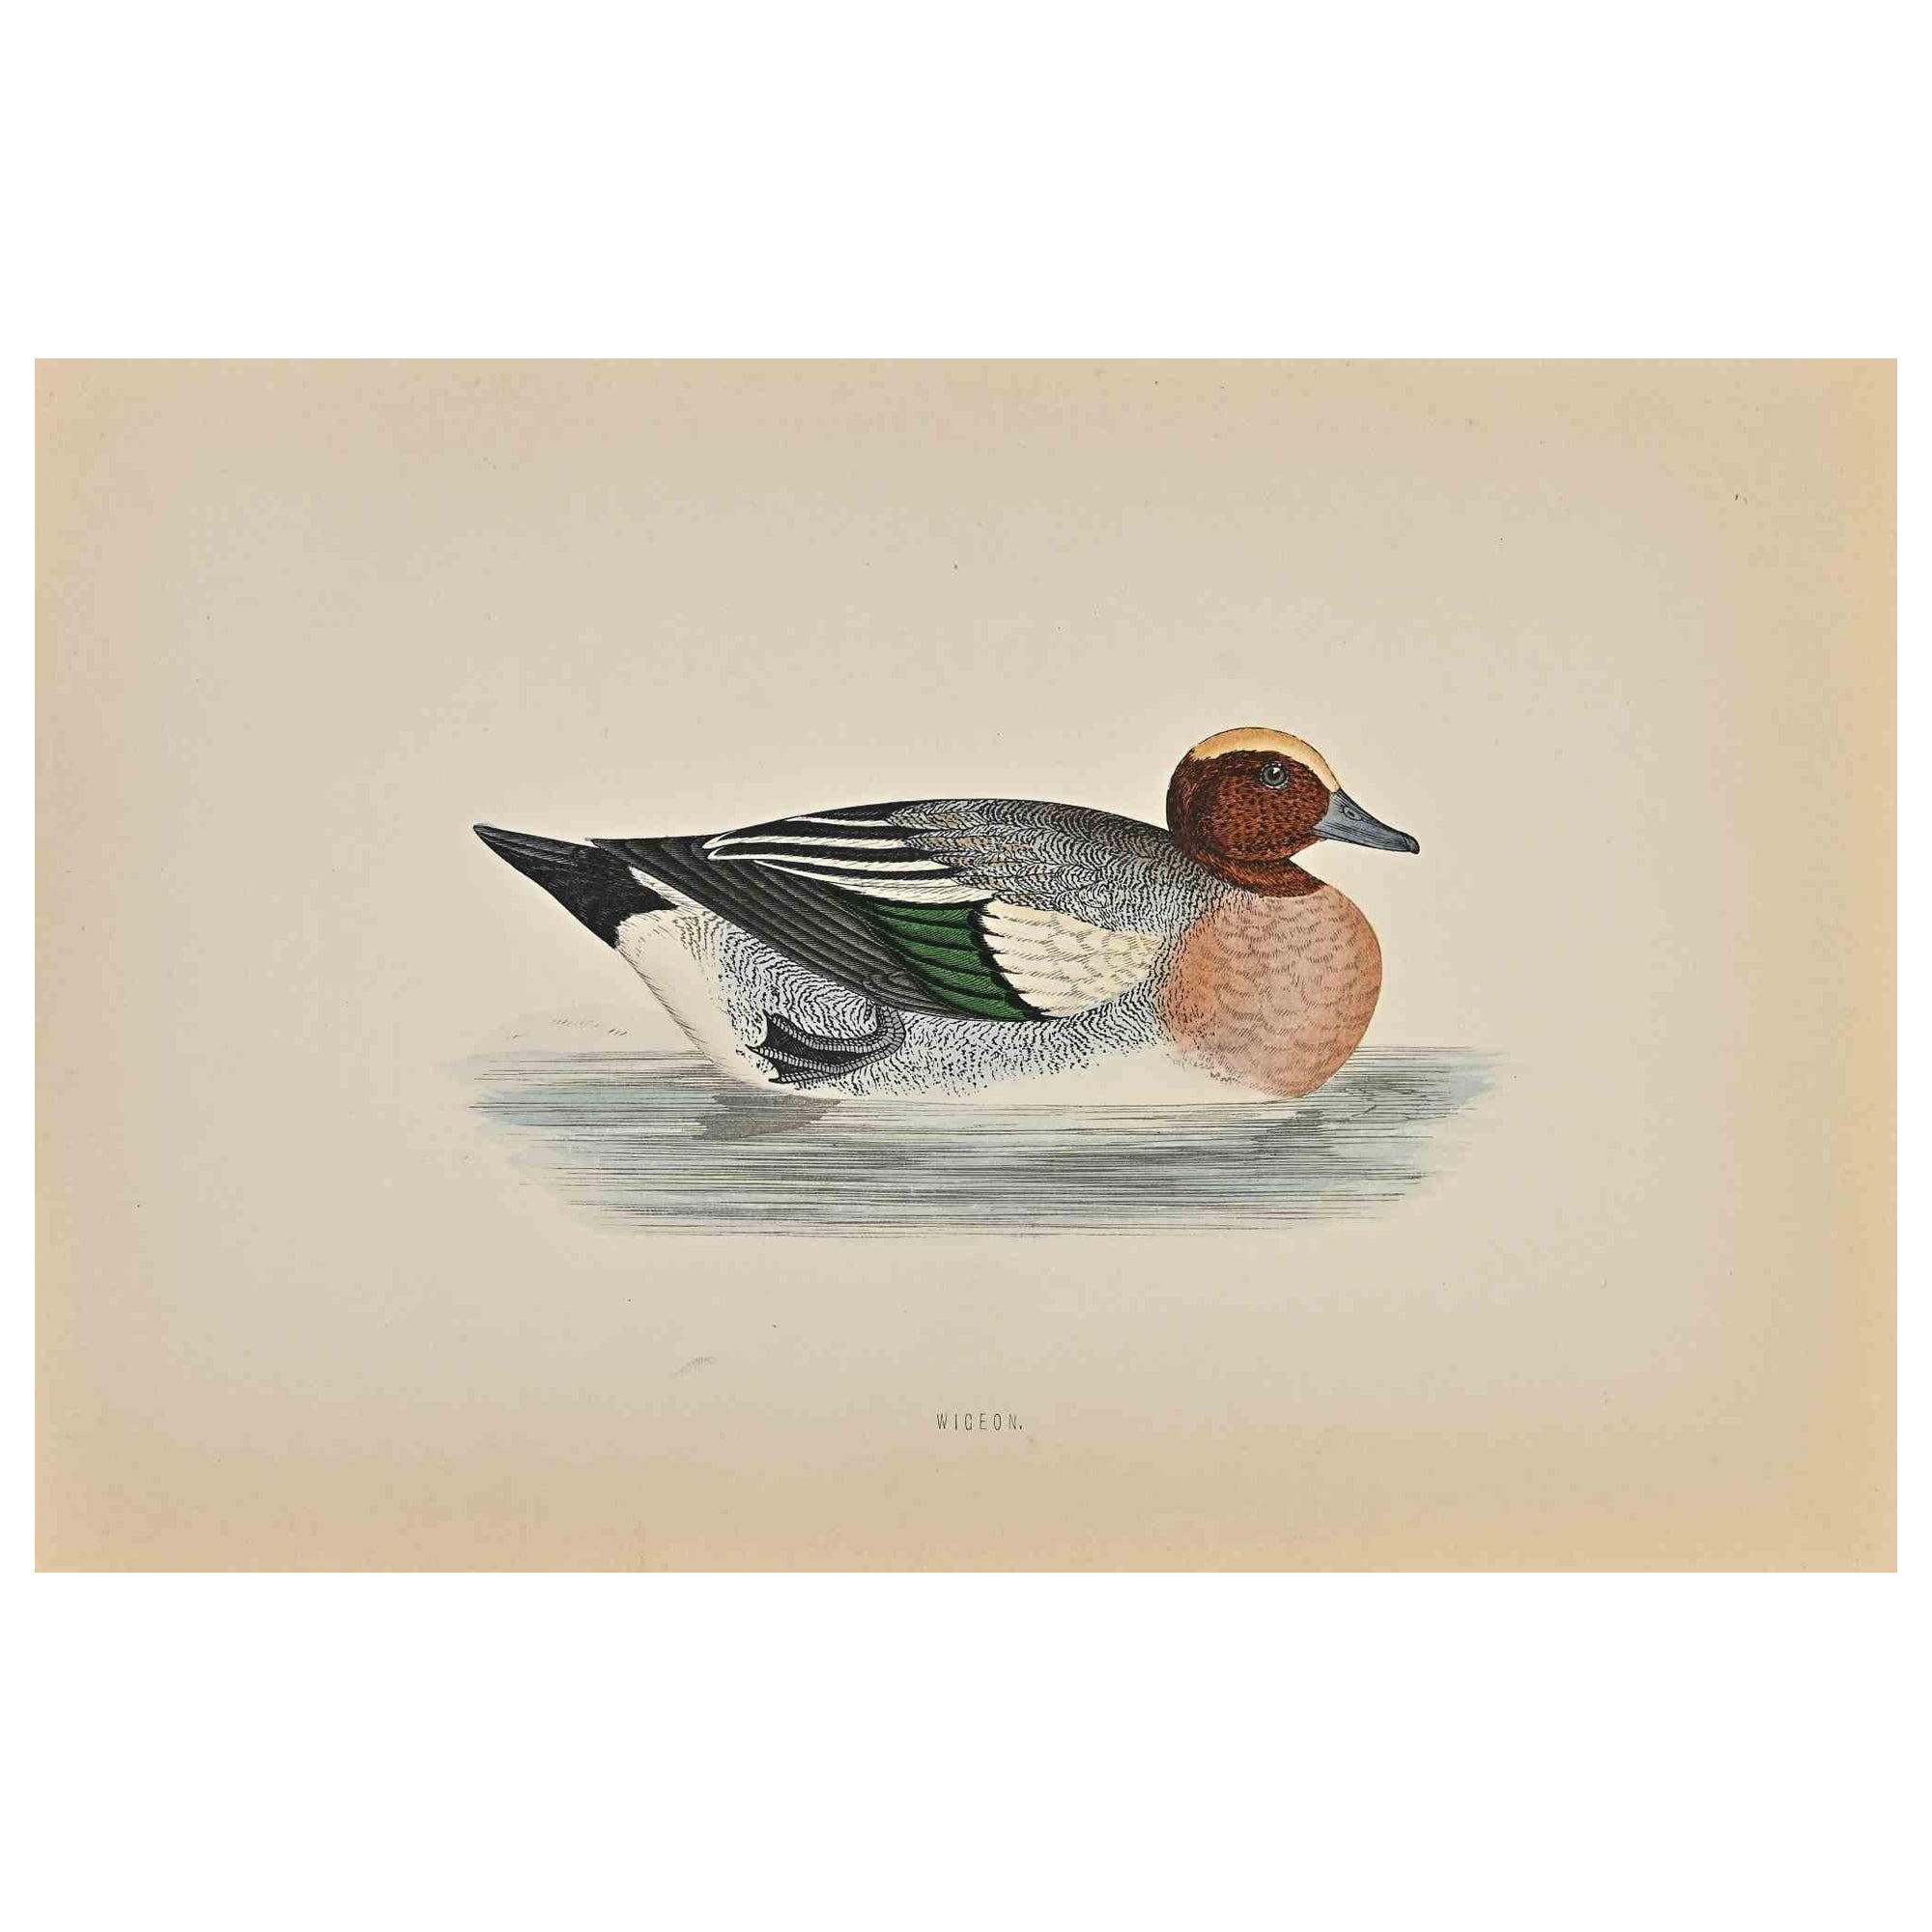 Wigeon is a modern artwork realized in 1870 by the British artist Alexander Francis Lydon (1836-1917).

Woodcut print on ivory-colored paper.

Hand-colored, published by London, Bell & Sons, 1870.  

The name of the bird is printed on the plate.